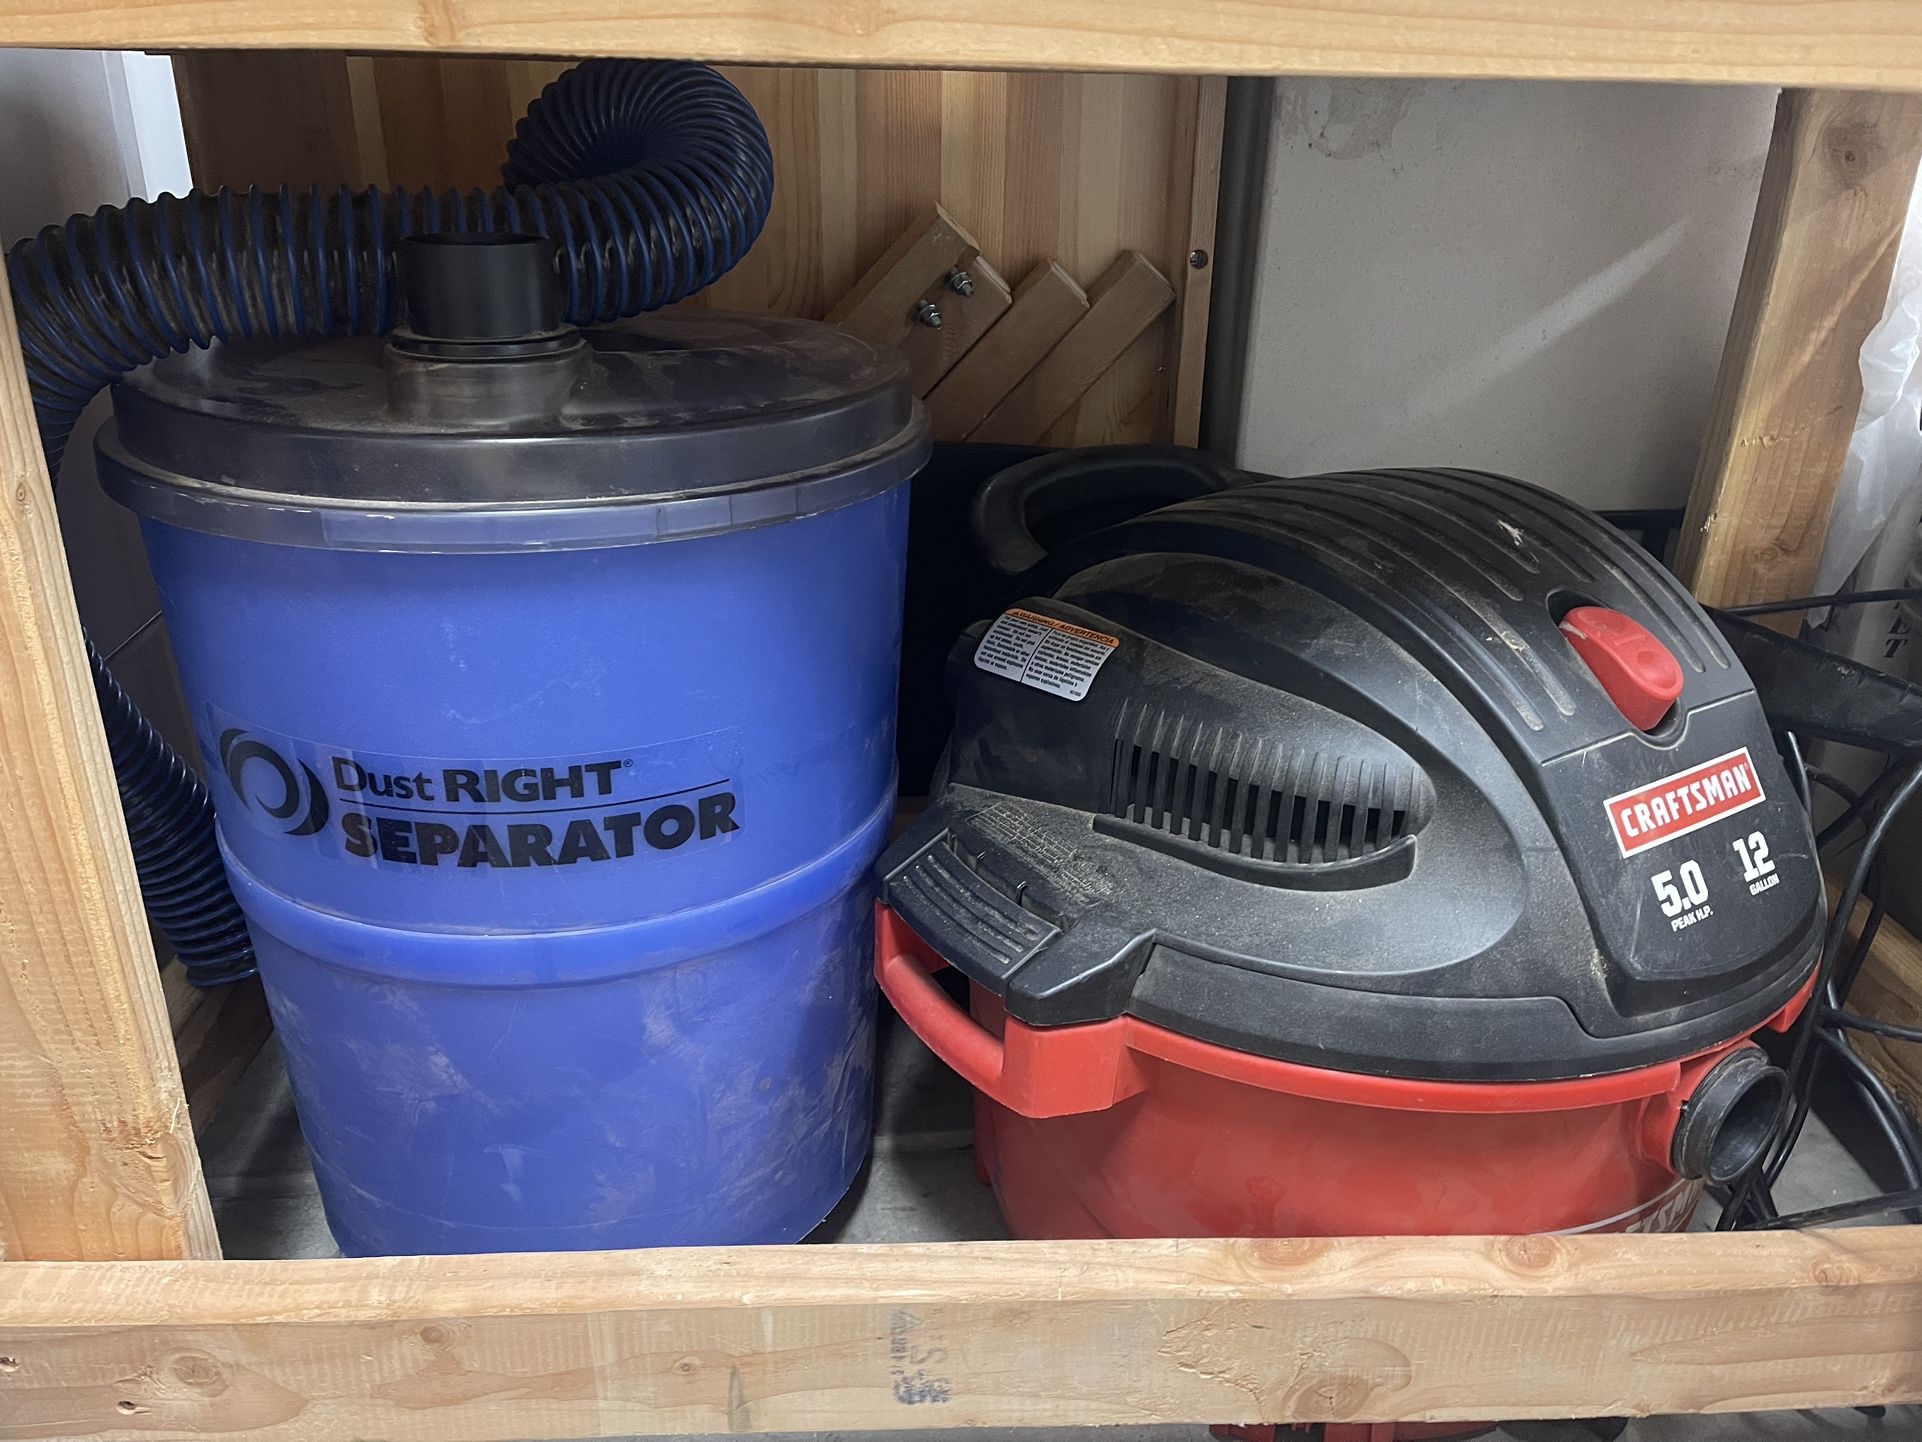 Dust Right Separator And Shop Vac 